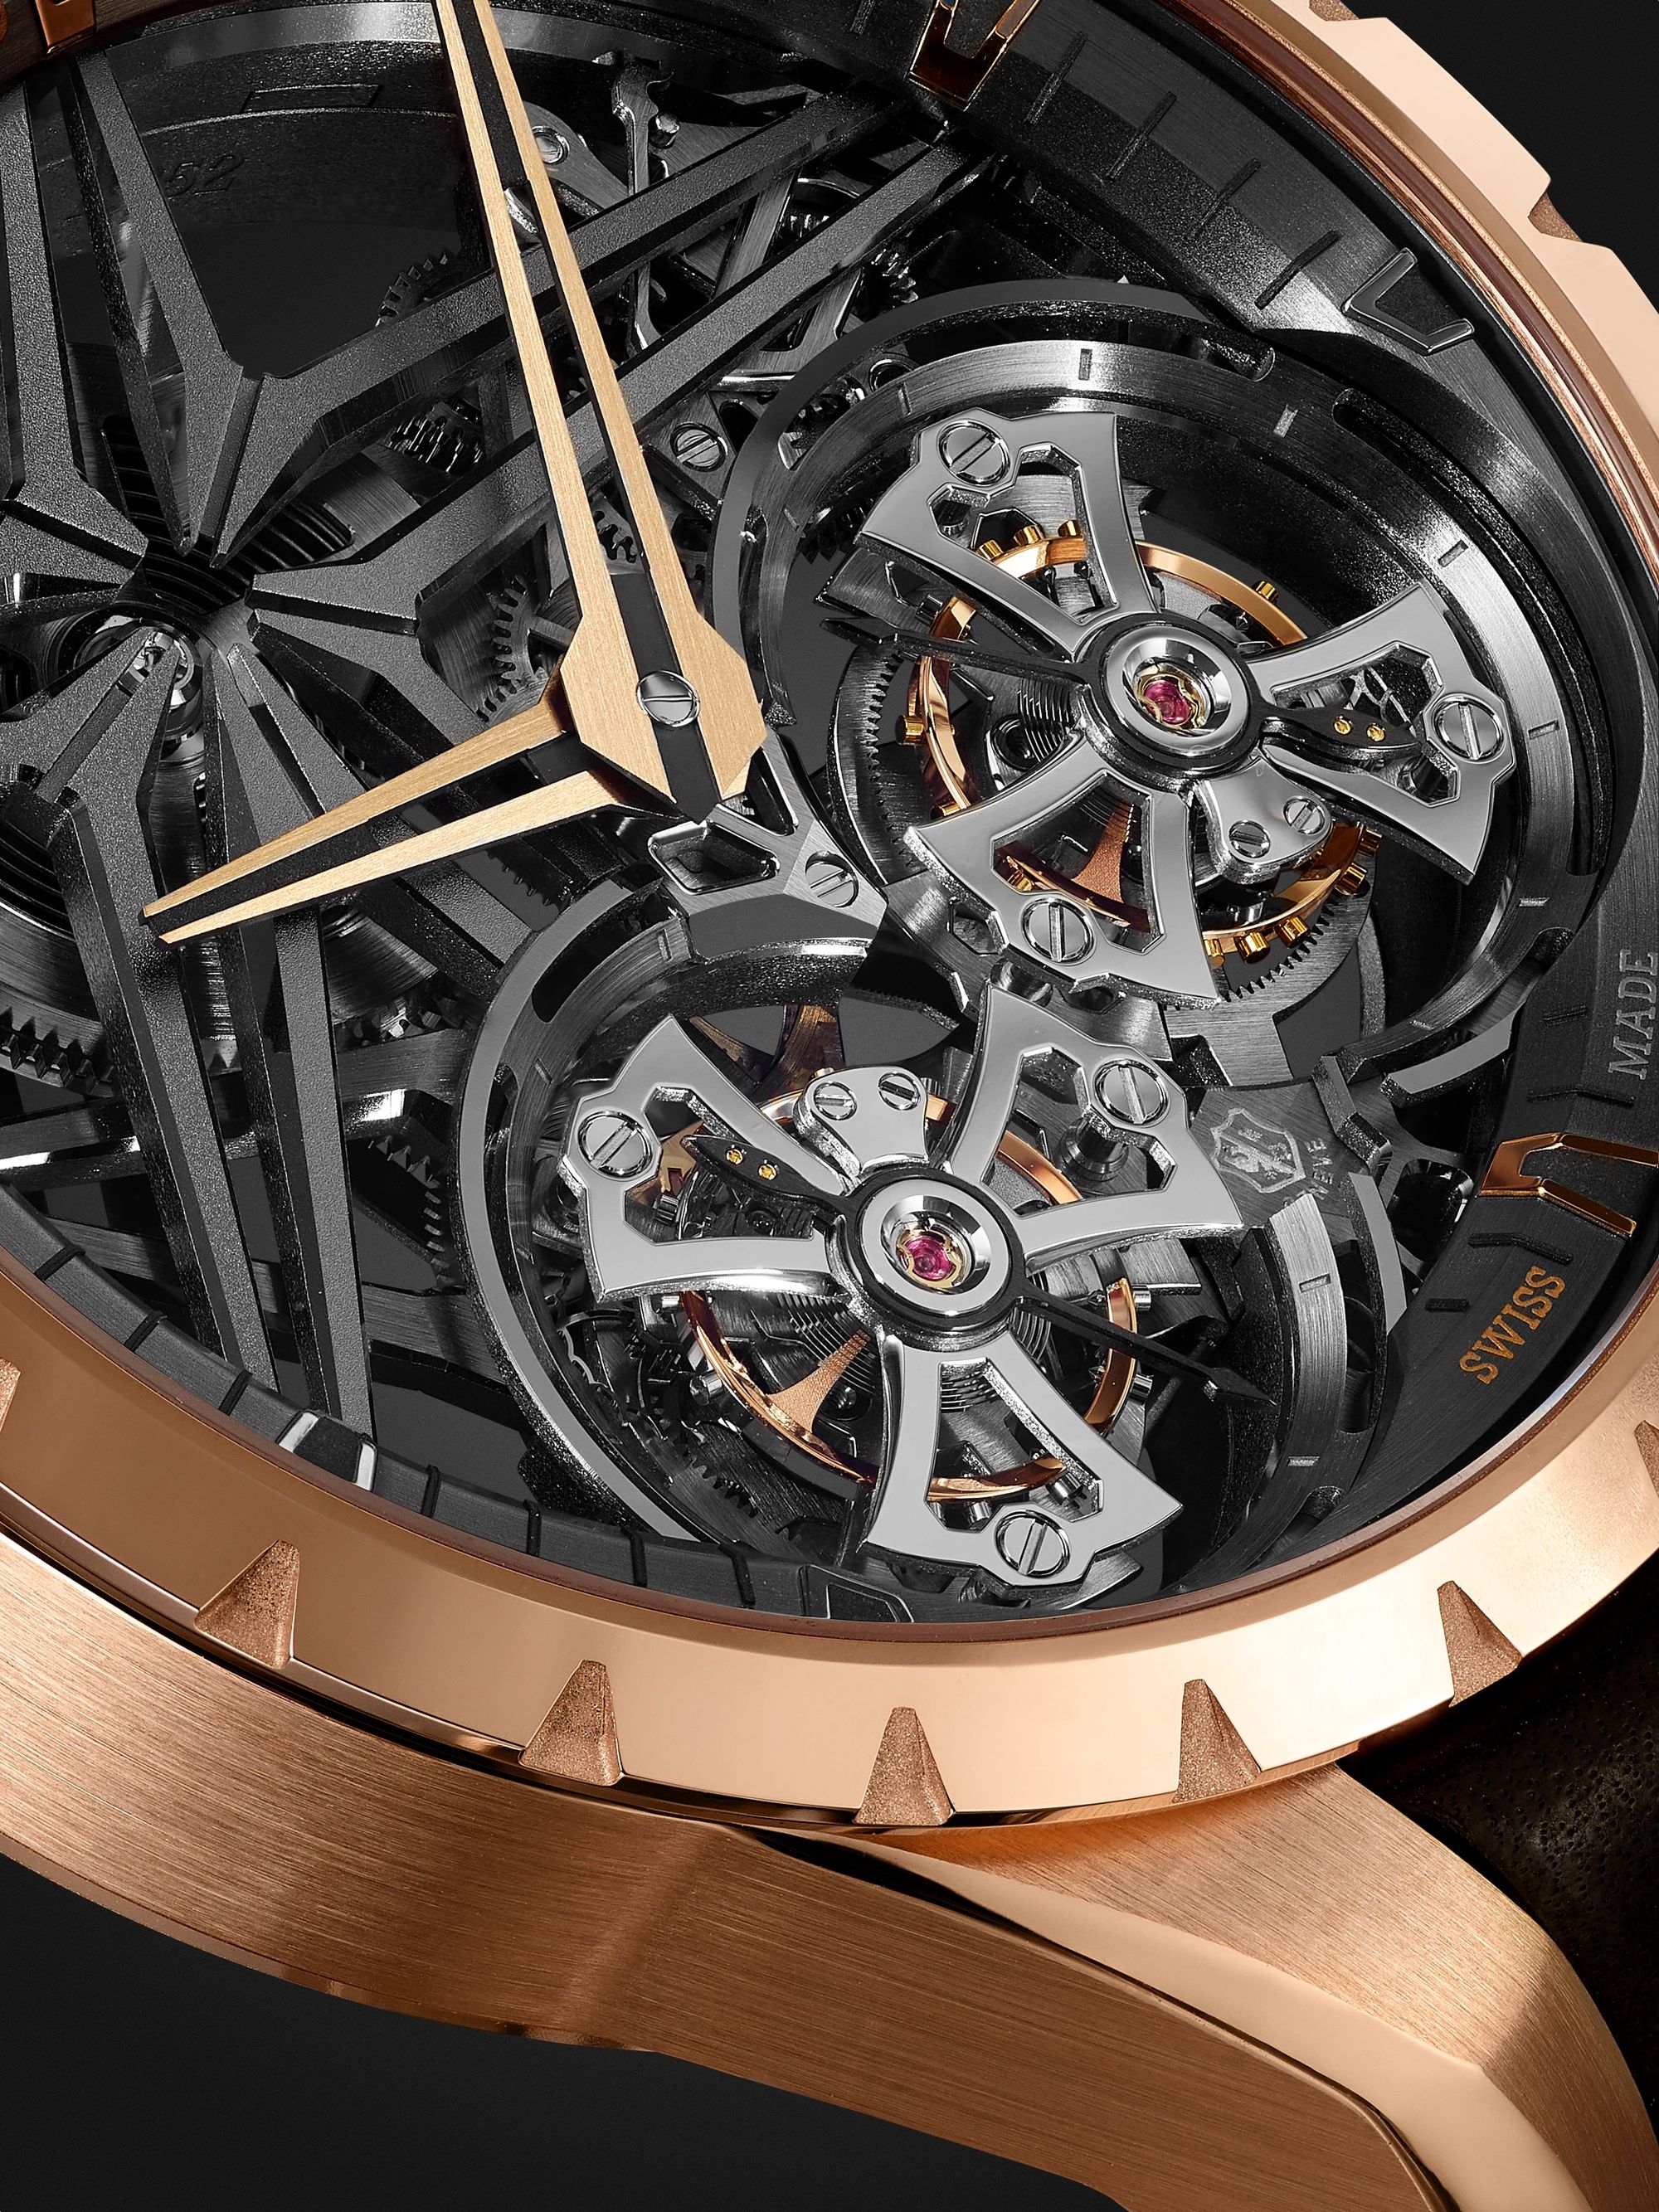 ROGER DUBUIS Excalibur EON Gold Limited Edition Hand-Wound Double Flying Tourbillon 45mm 18-Karat Pink-Gold and Leather Watch, Ref. No. DBEX0818